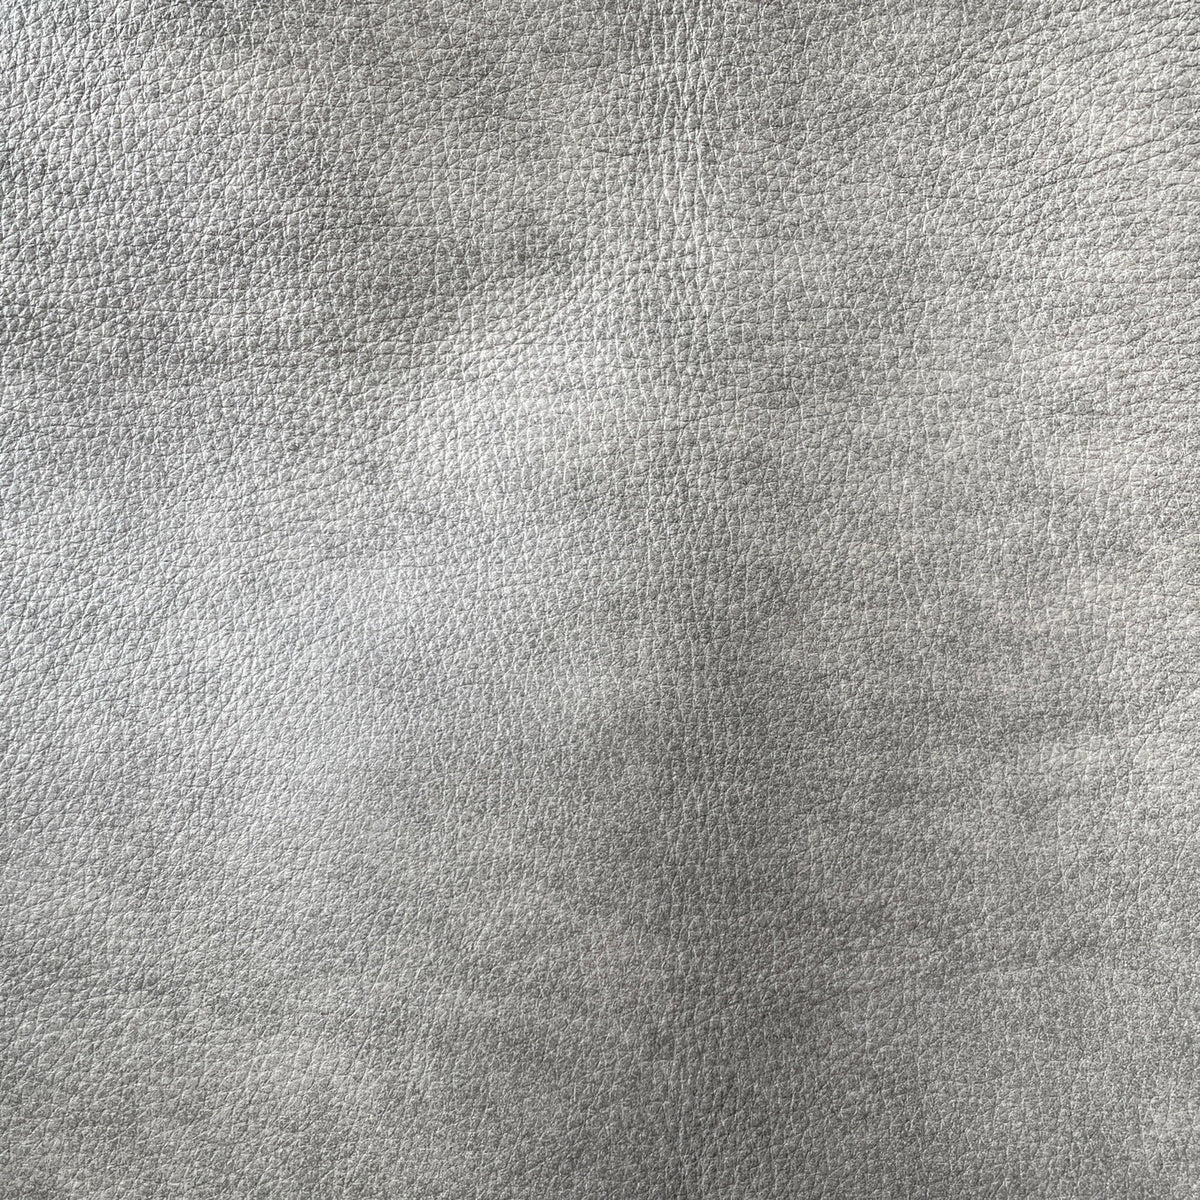 Upholstery Cow Hide #08 | Grey | 1.2mm | 56 sq.ft | From $390 ea.